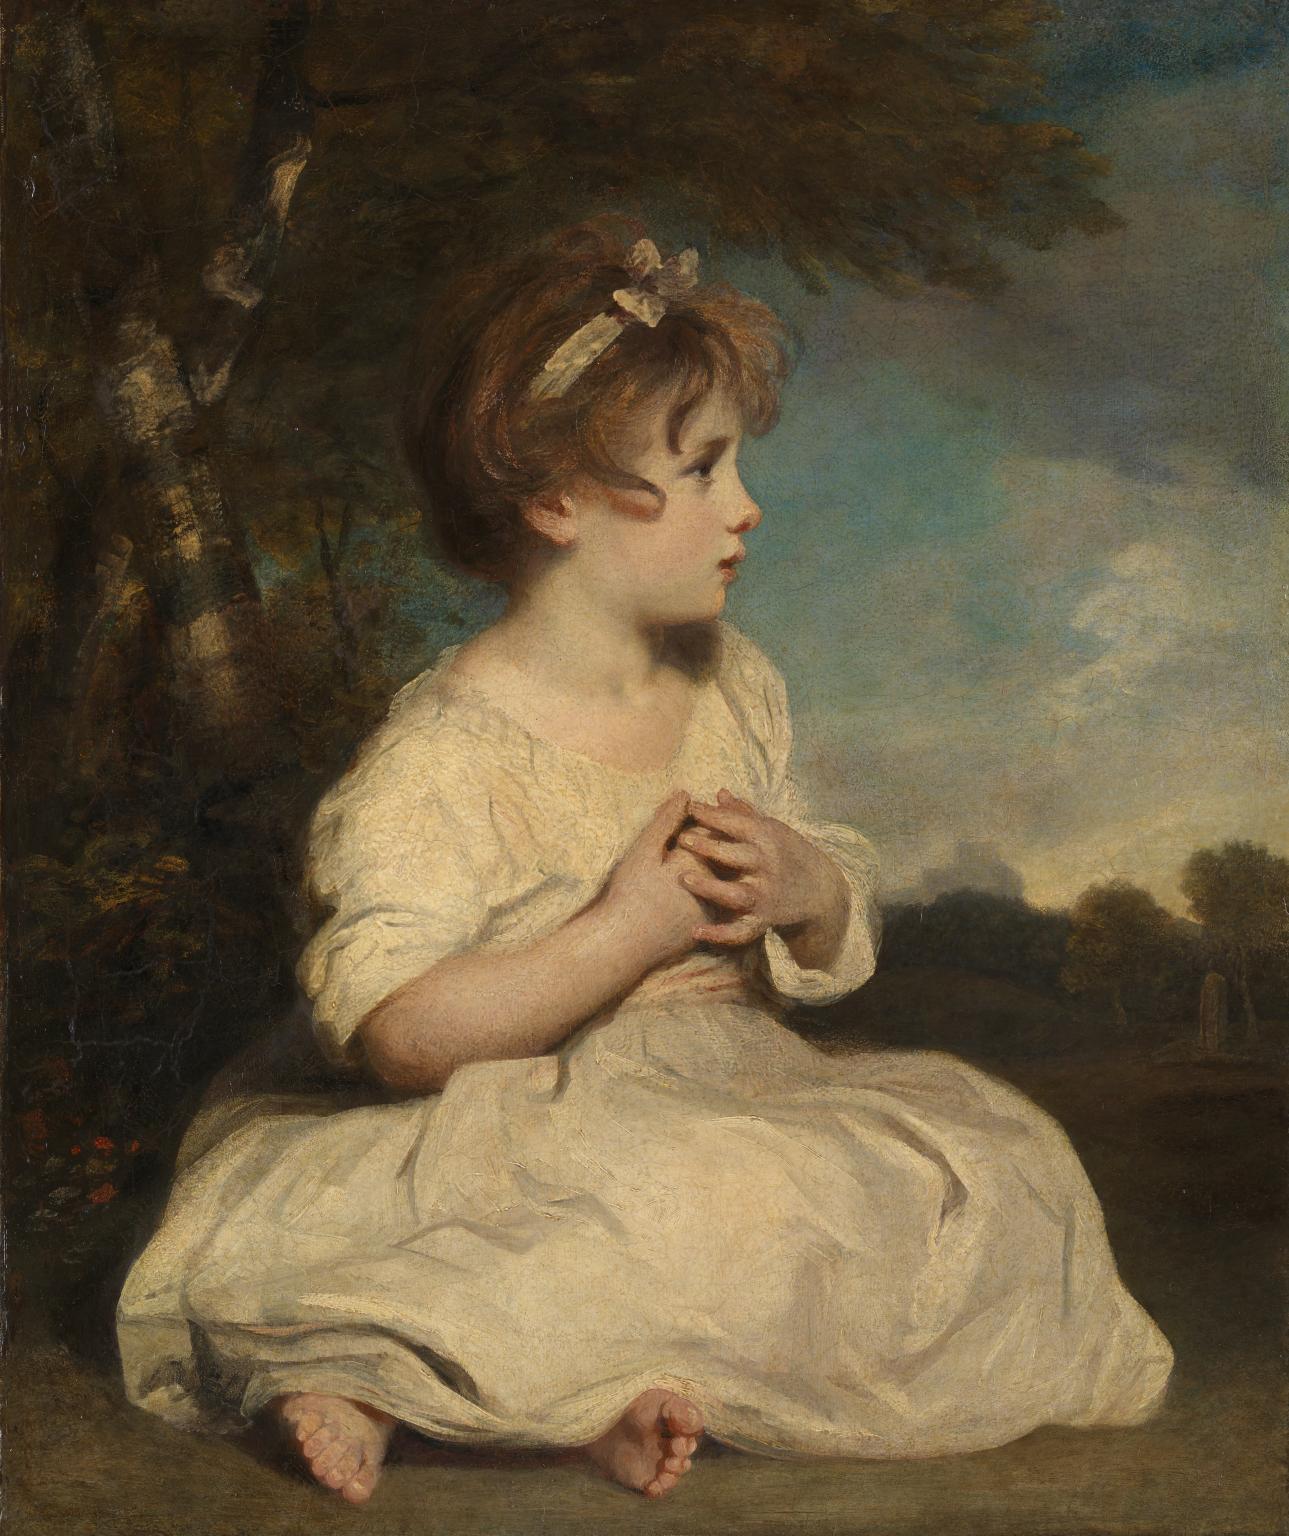 The Age of Innocence (painting) by Joshua Reynolds (1788)  A young girl in a white dress underneath a tree looking to the right